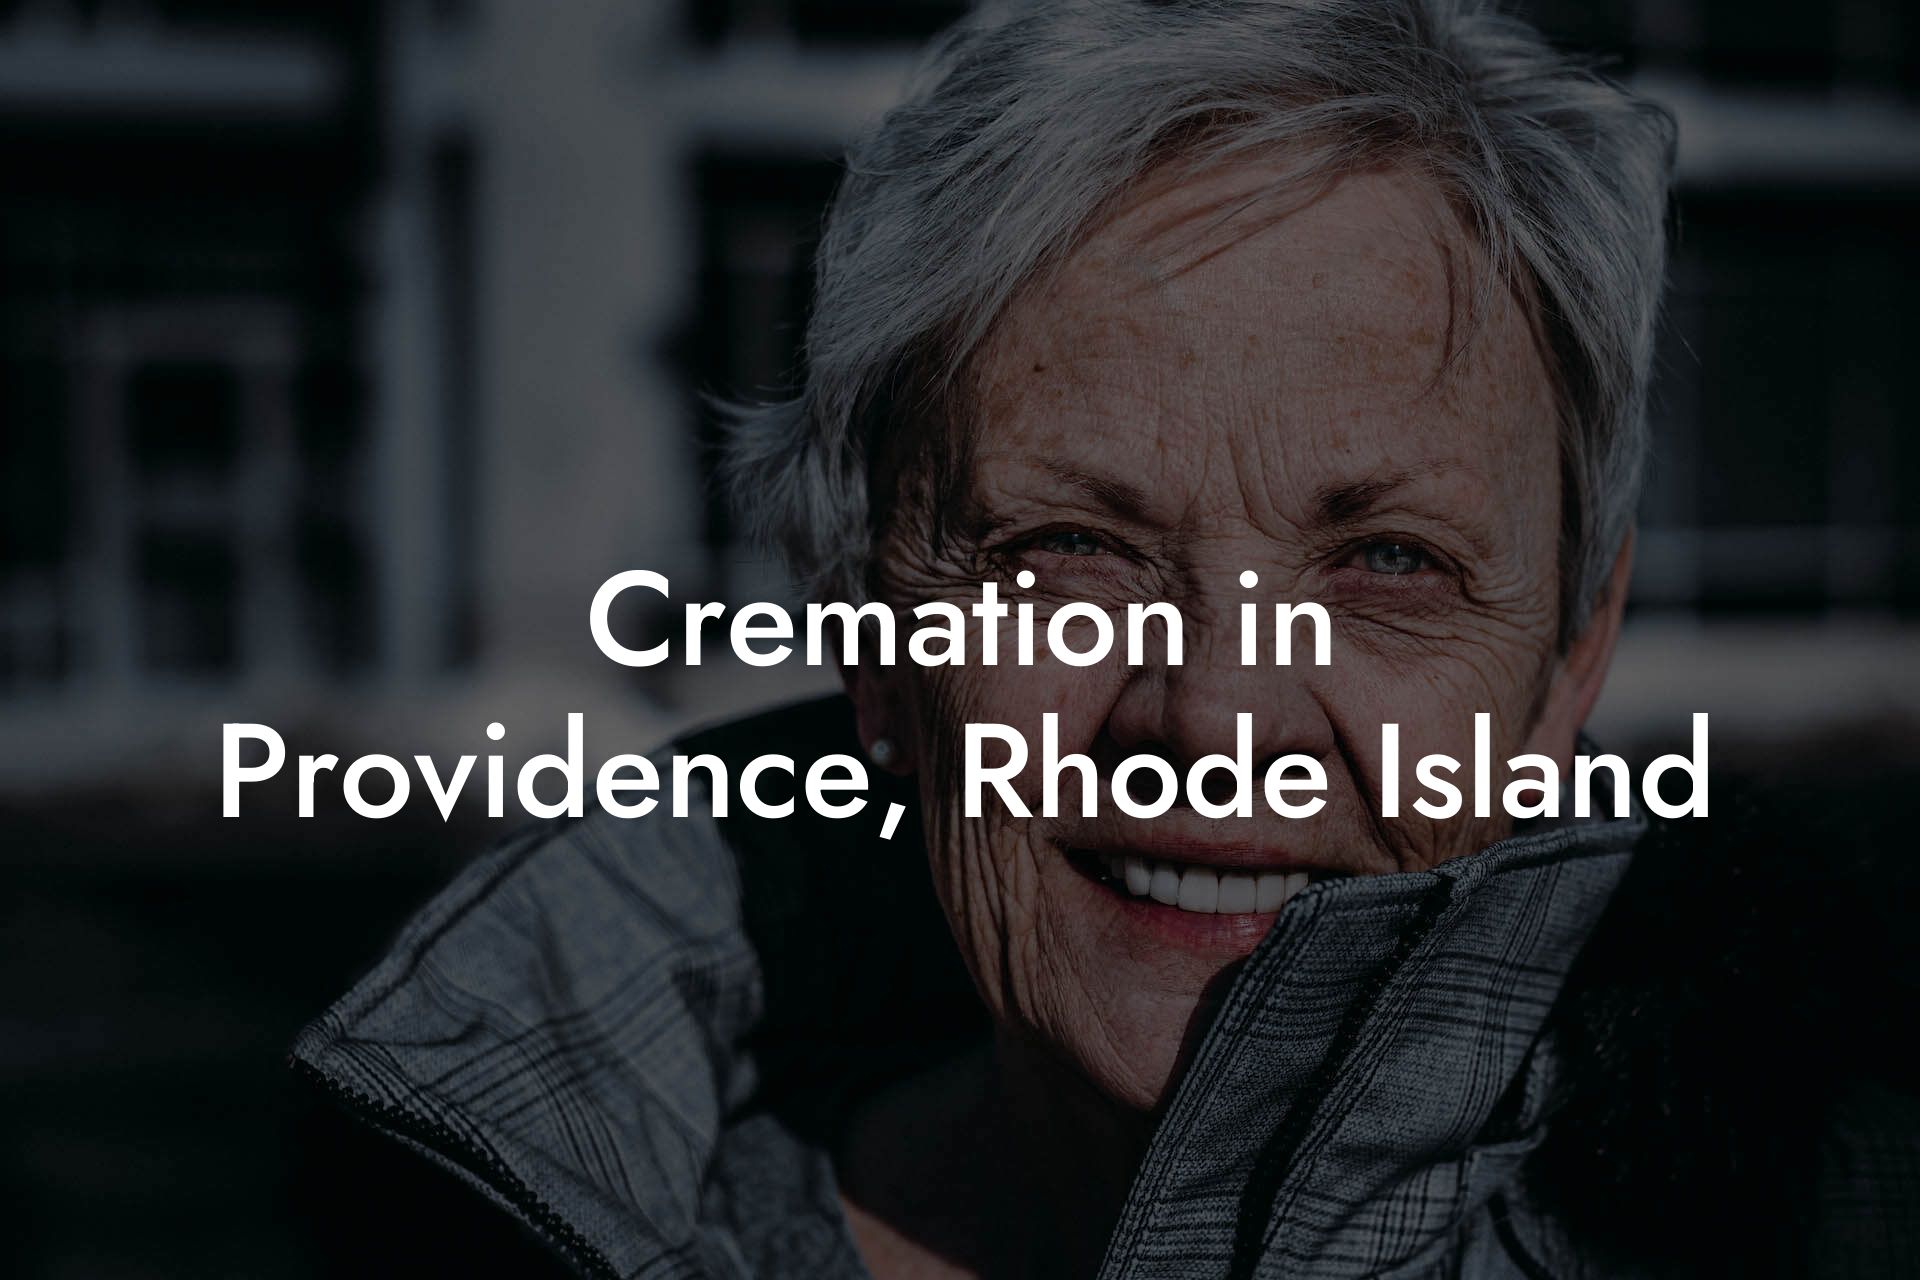 Cremation in Providence, Rhode Island